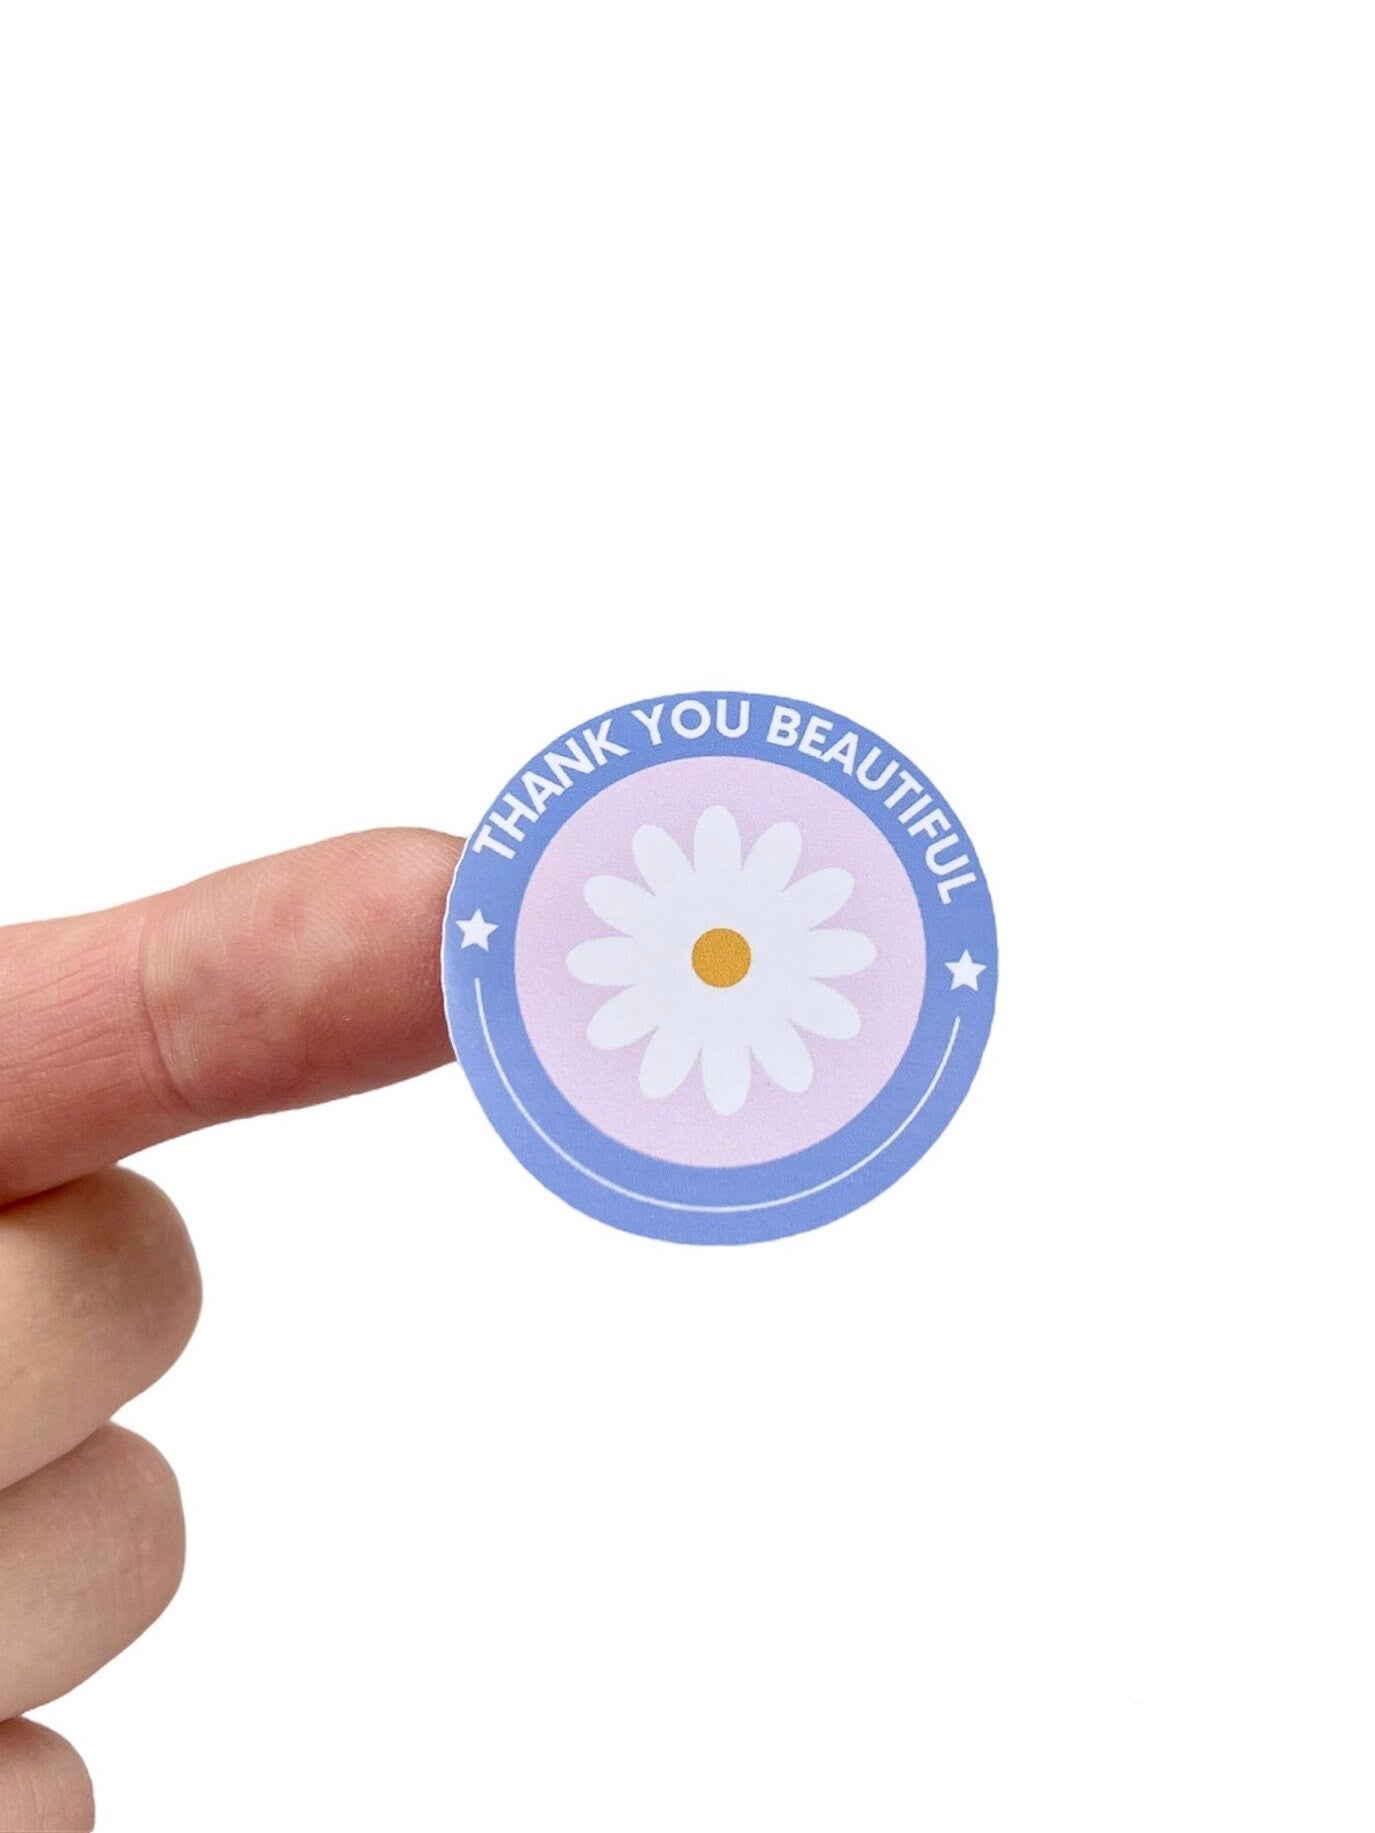 Thank You Beautiful Daisy Stickers | 3.8cm Label | Daisy 1st Birthday Sticker | Business Packaging